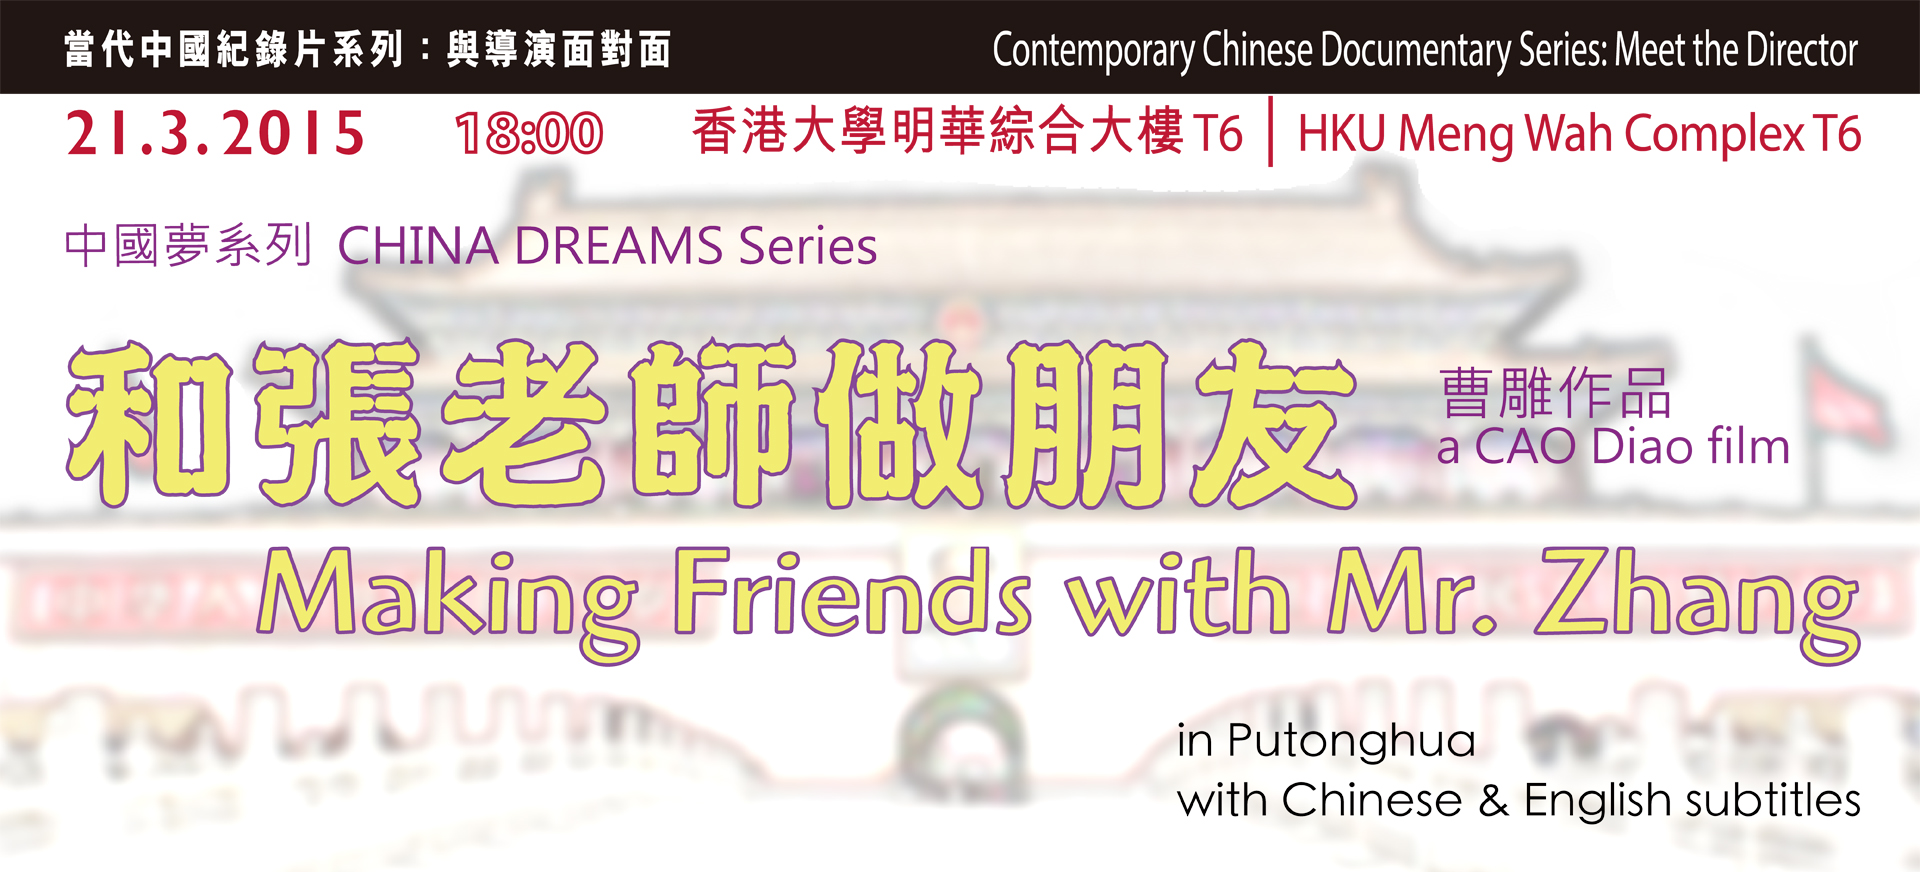 Making Friends with Mr. Zhang - Contemporary Chinese Documentary Series: Meet the Director